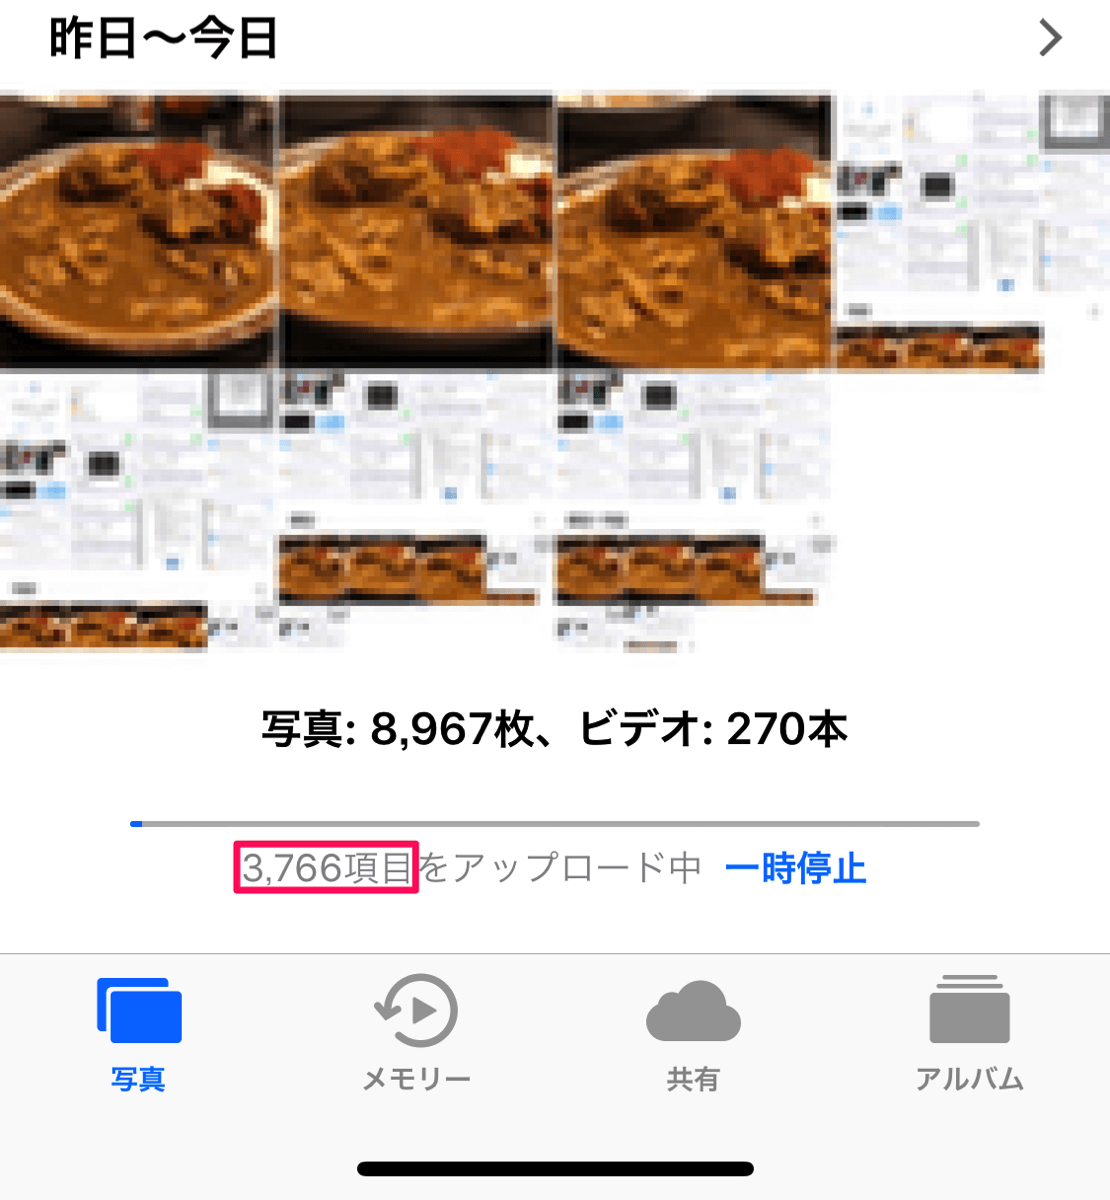 Upload to iCloud Photo Library Upload is slow5